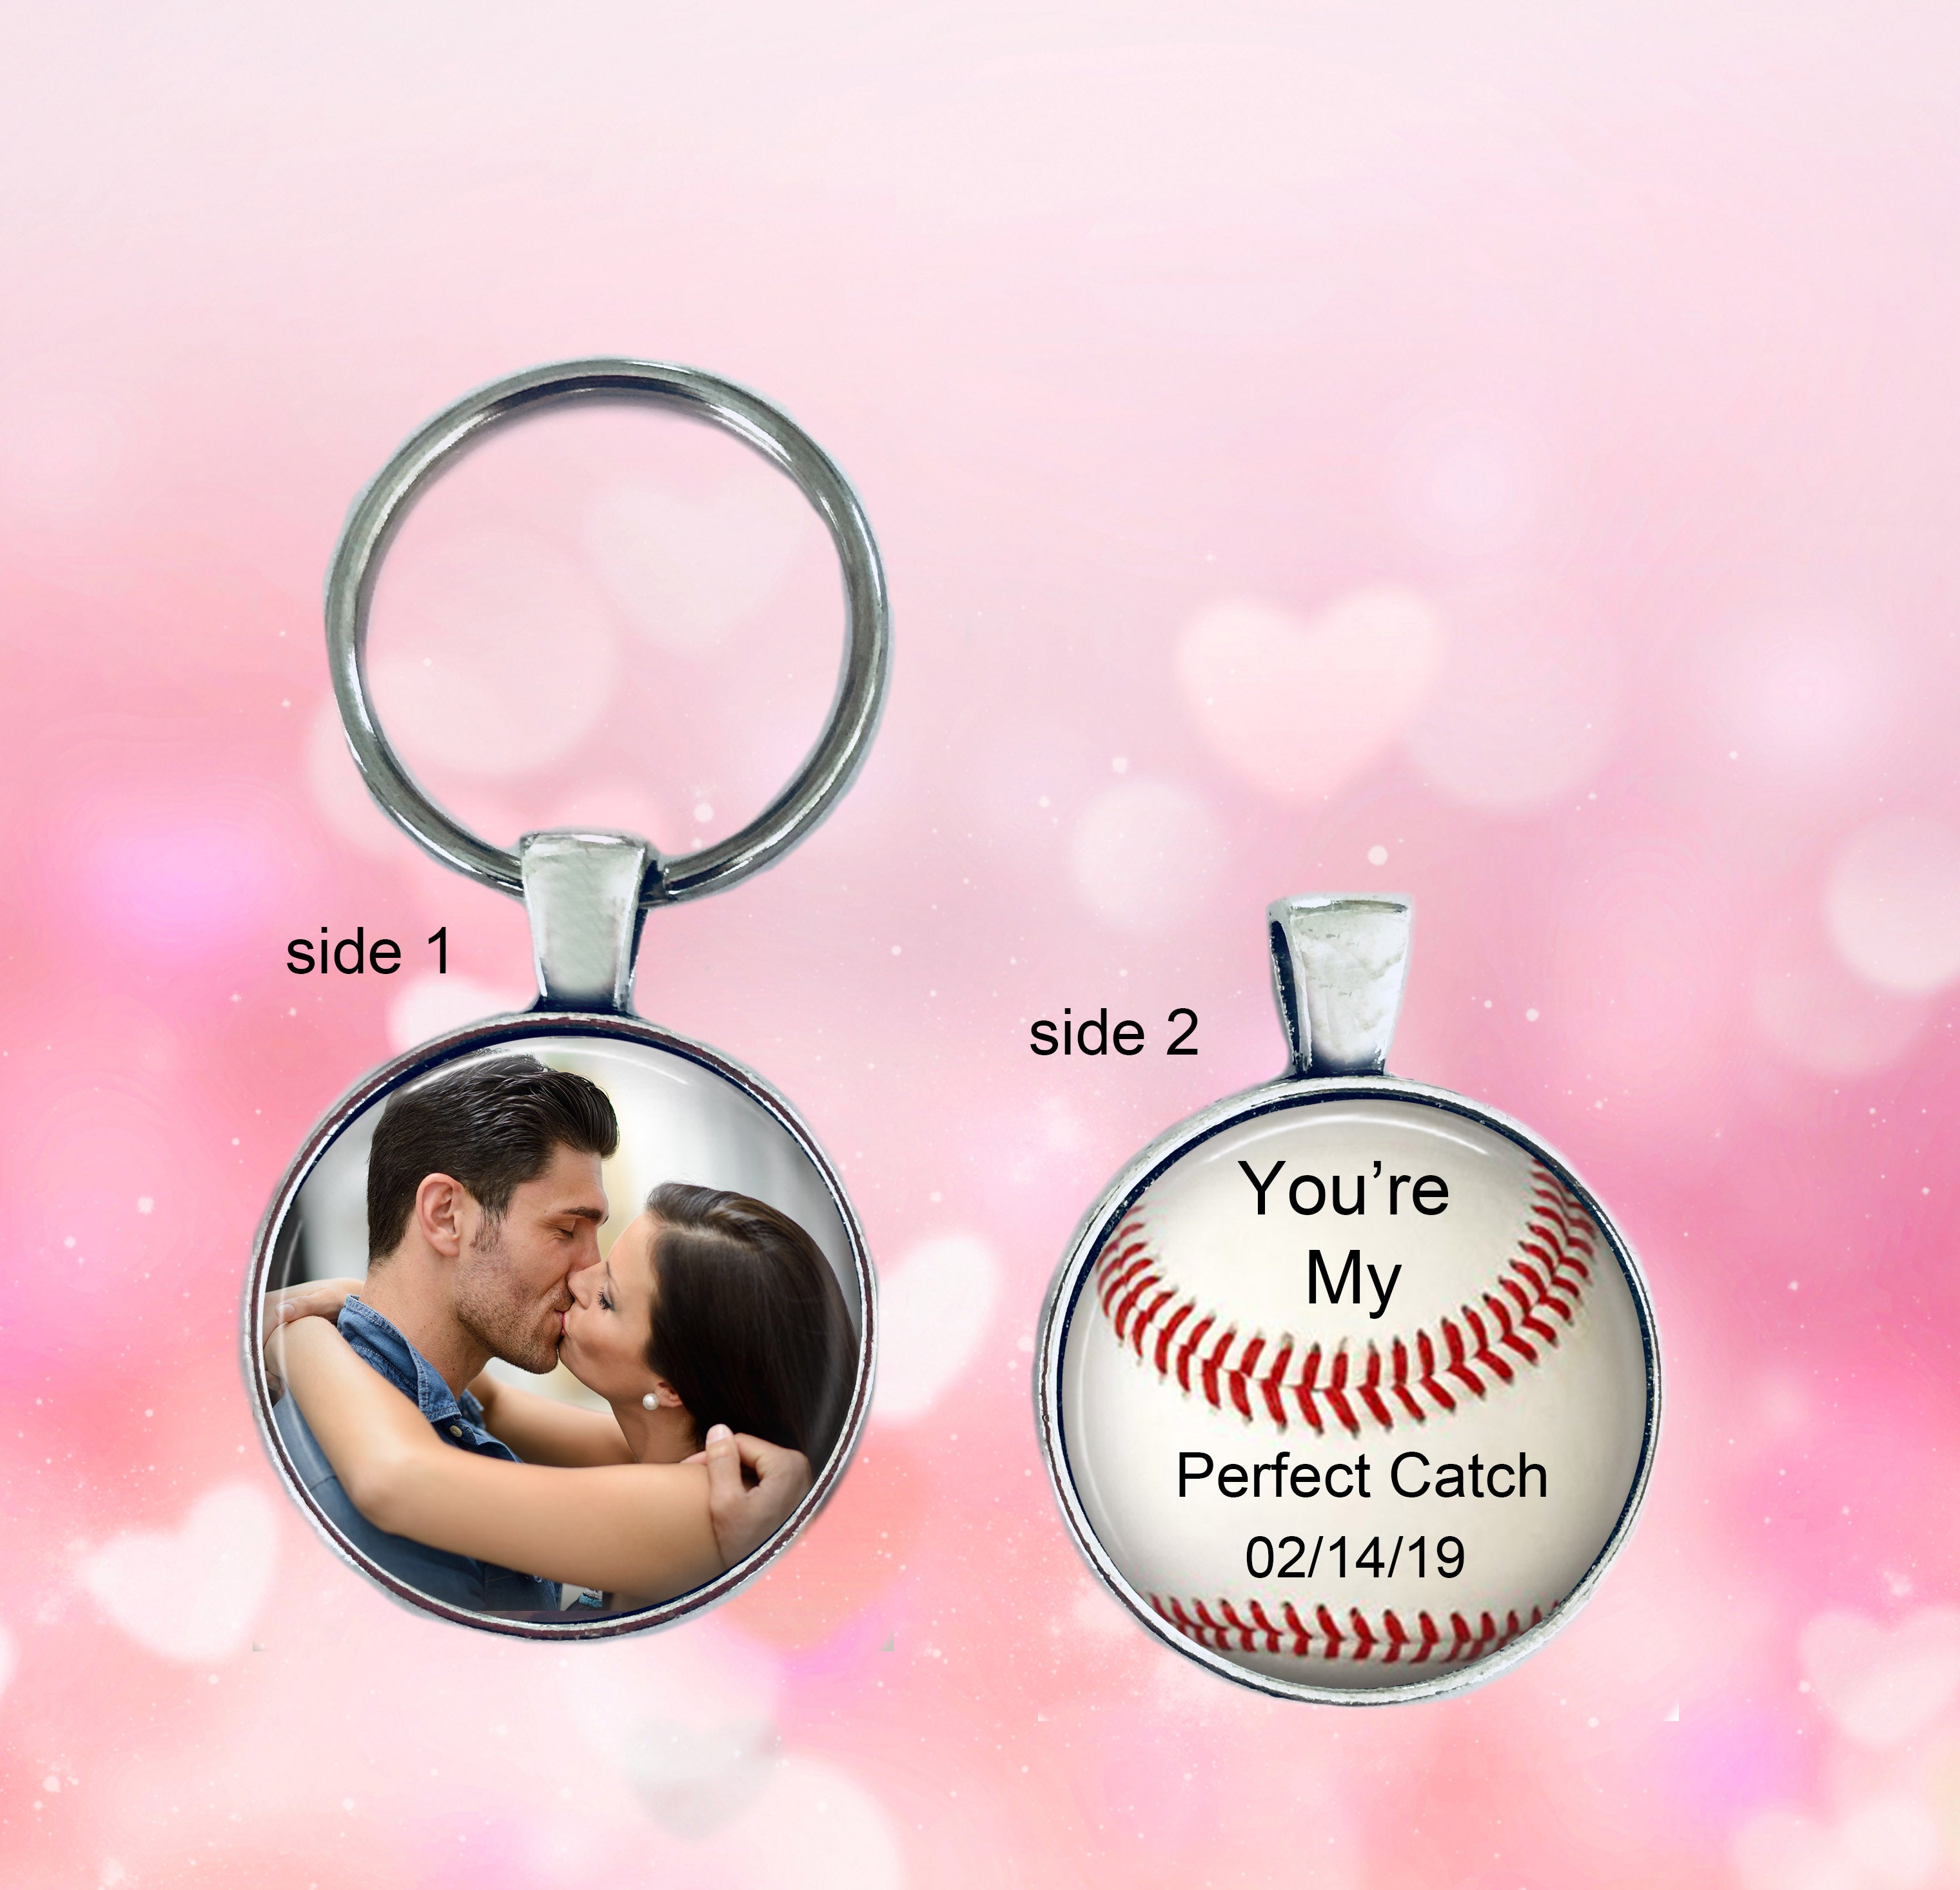 CUSTOM PHOTO KEYCHAIN - Your Photo on one side - Baseball theme – Now  That's Personal!